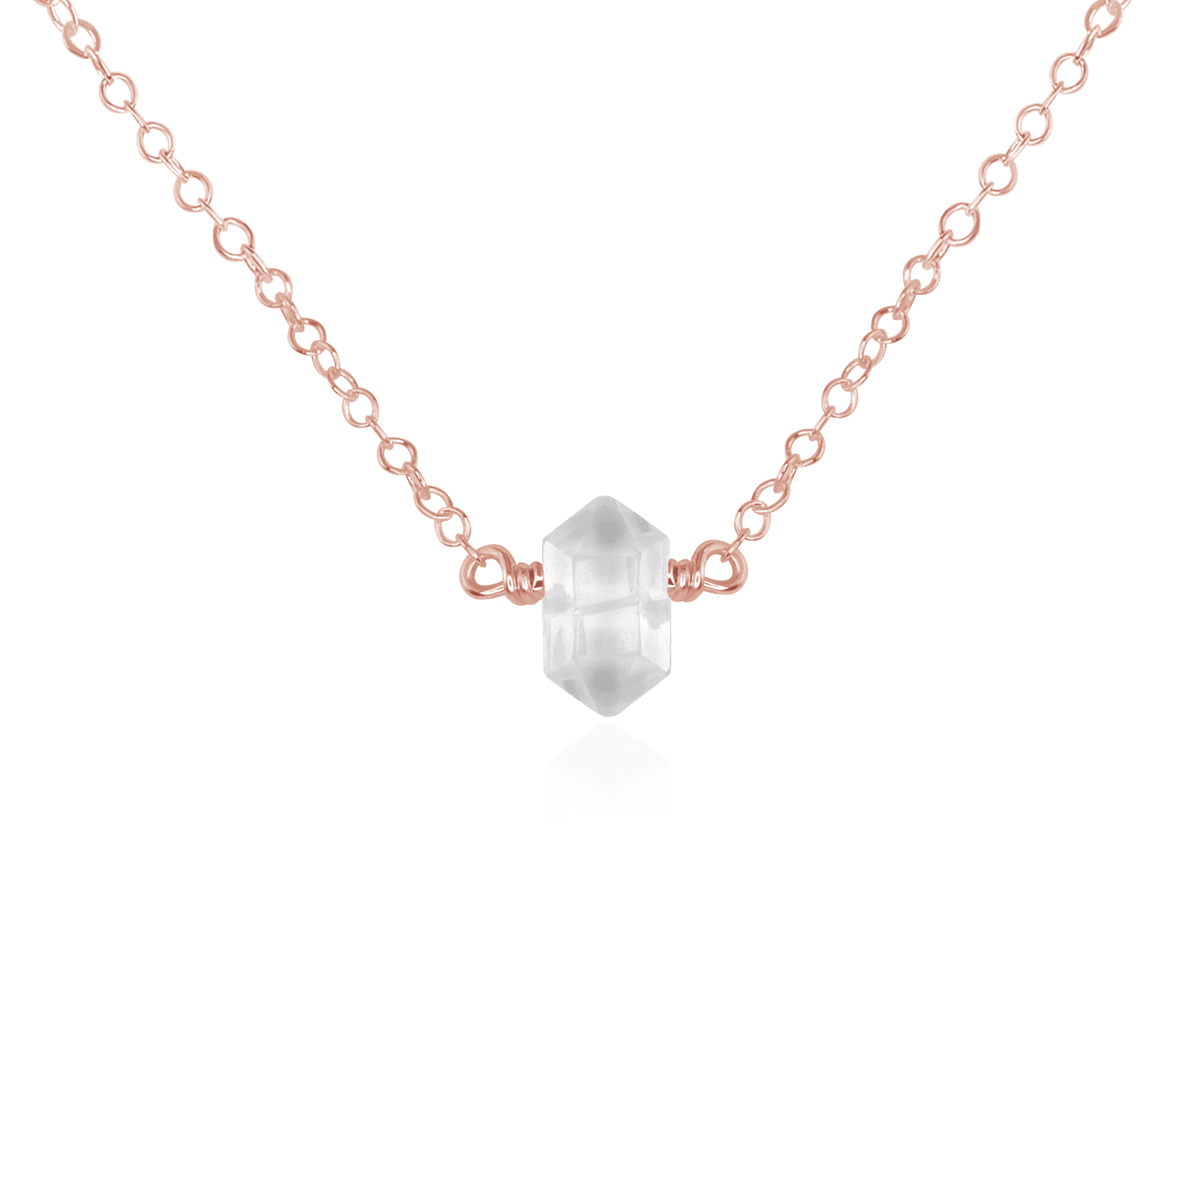 Double Terminated Crystal Necklace - Crystal Quartz - 14K Rose Gold Fill - Luna Tide Handmade Jewellery